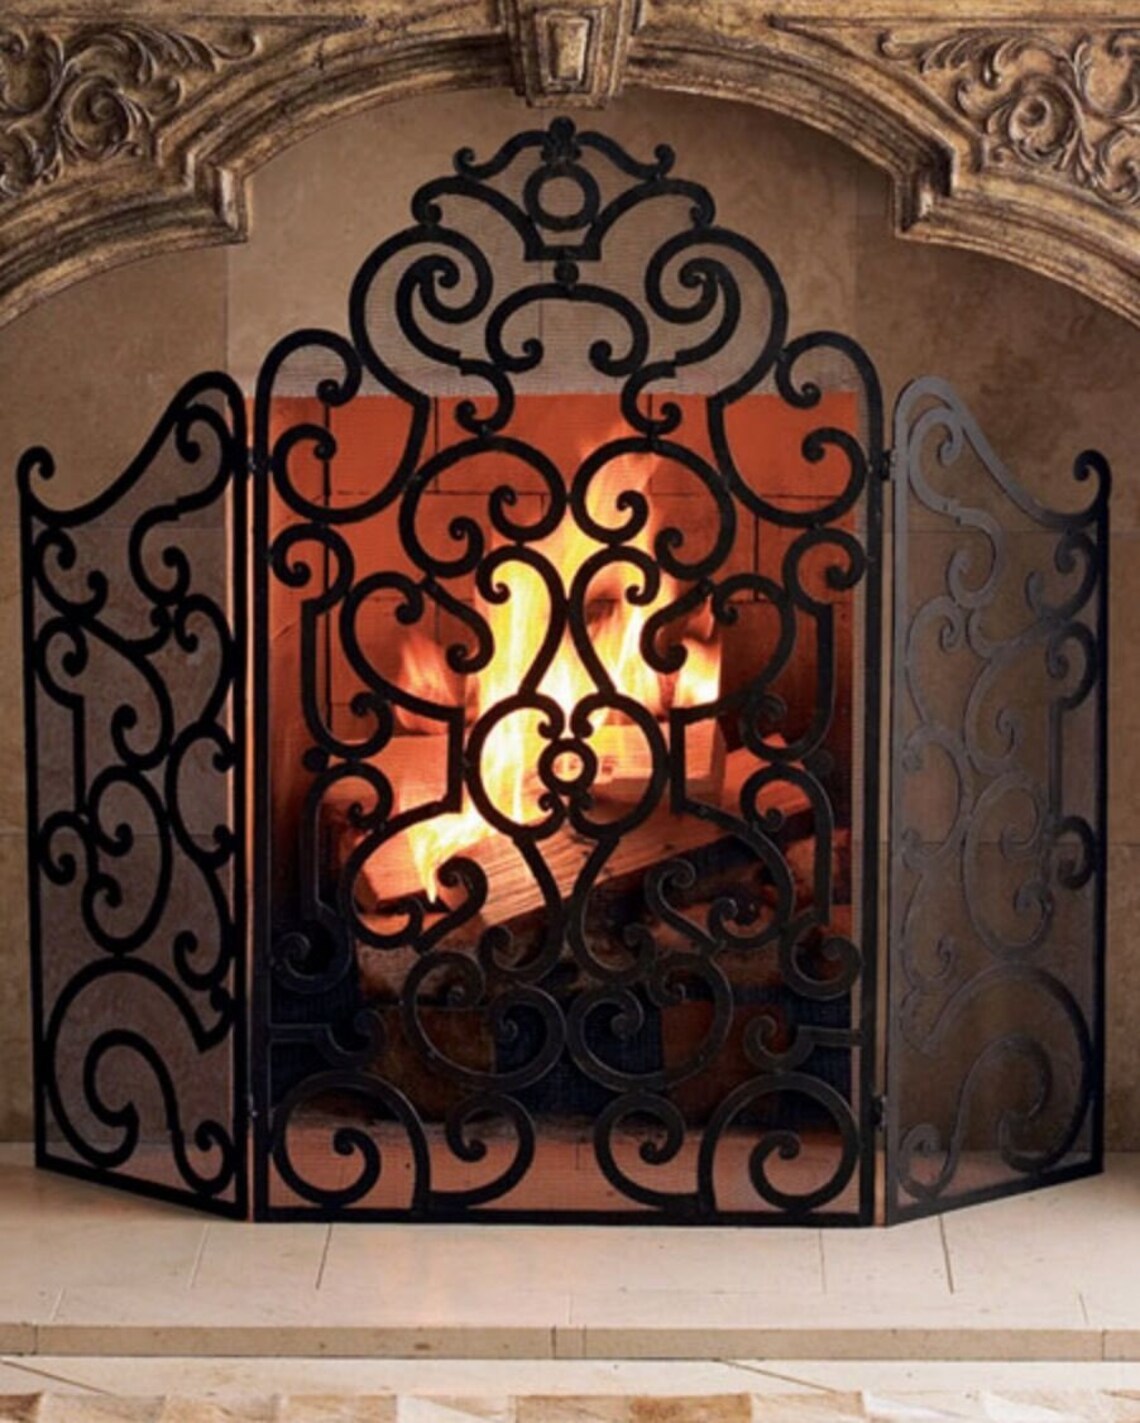 3-Panel Iron Fireplace screen with Stained Antique Brown Scroll Design